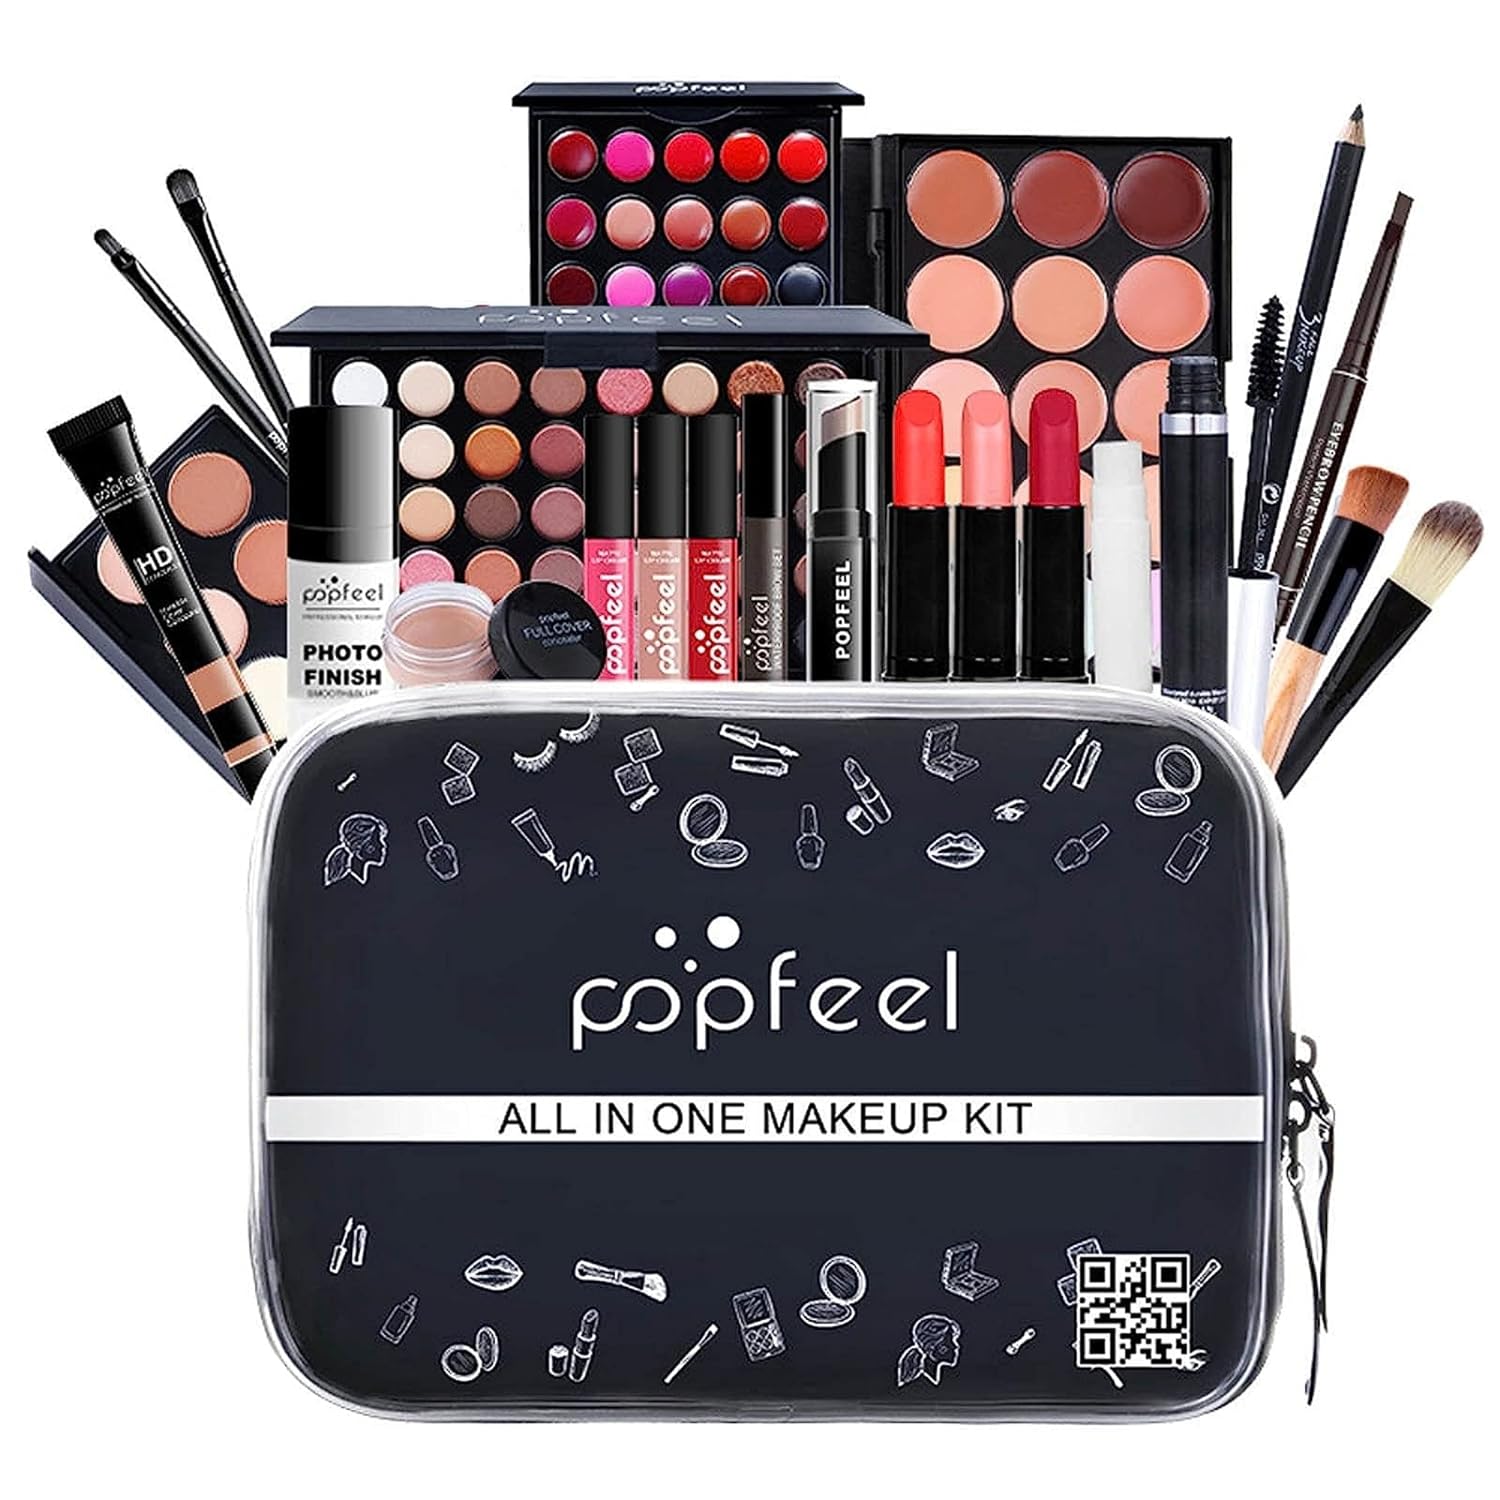 MAEPEOR All In One Makeup Kit 24PCS Makeup Kit for Women Full Kit Multi-Purpose Makeup Set for Beginners or Pros (24Pieces, KIT003)